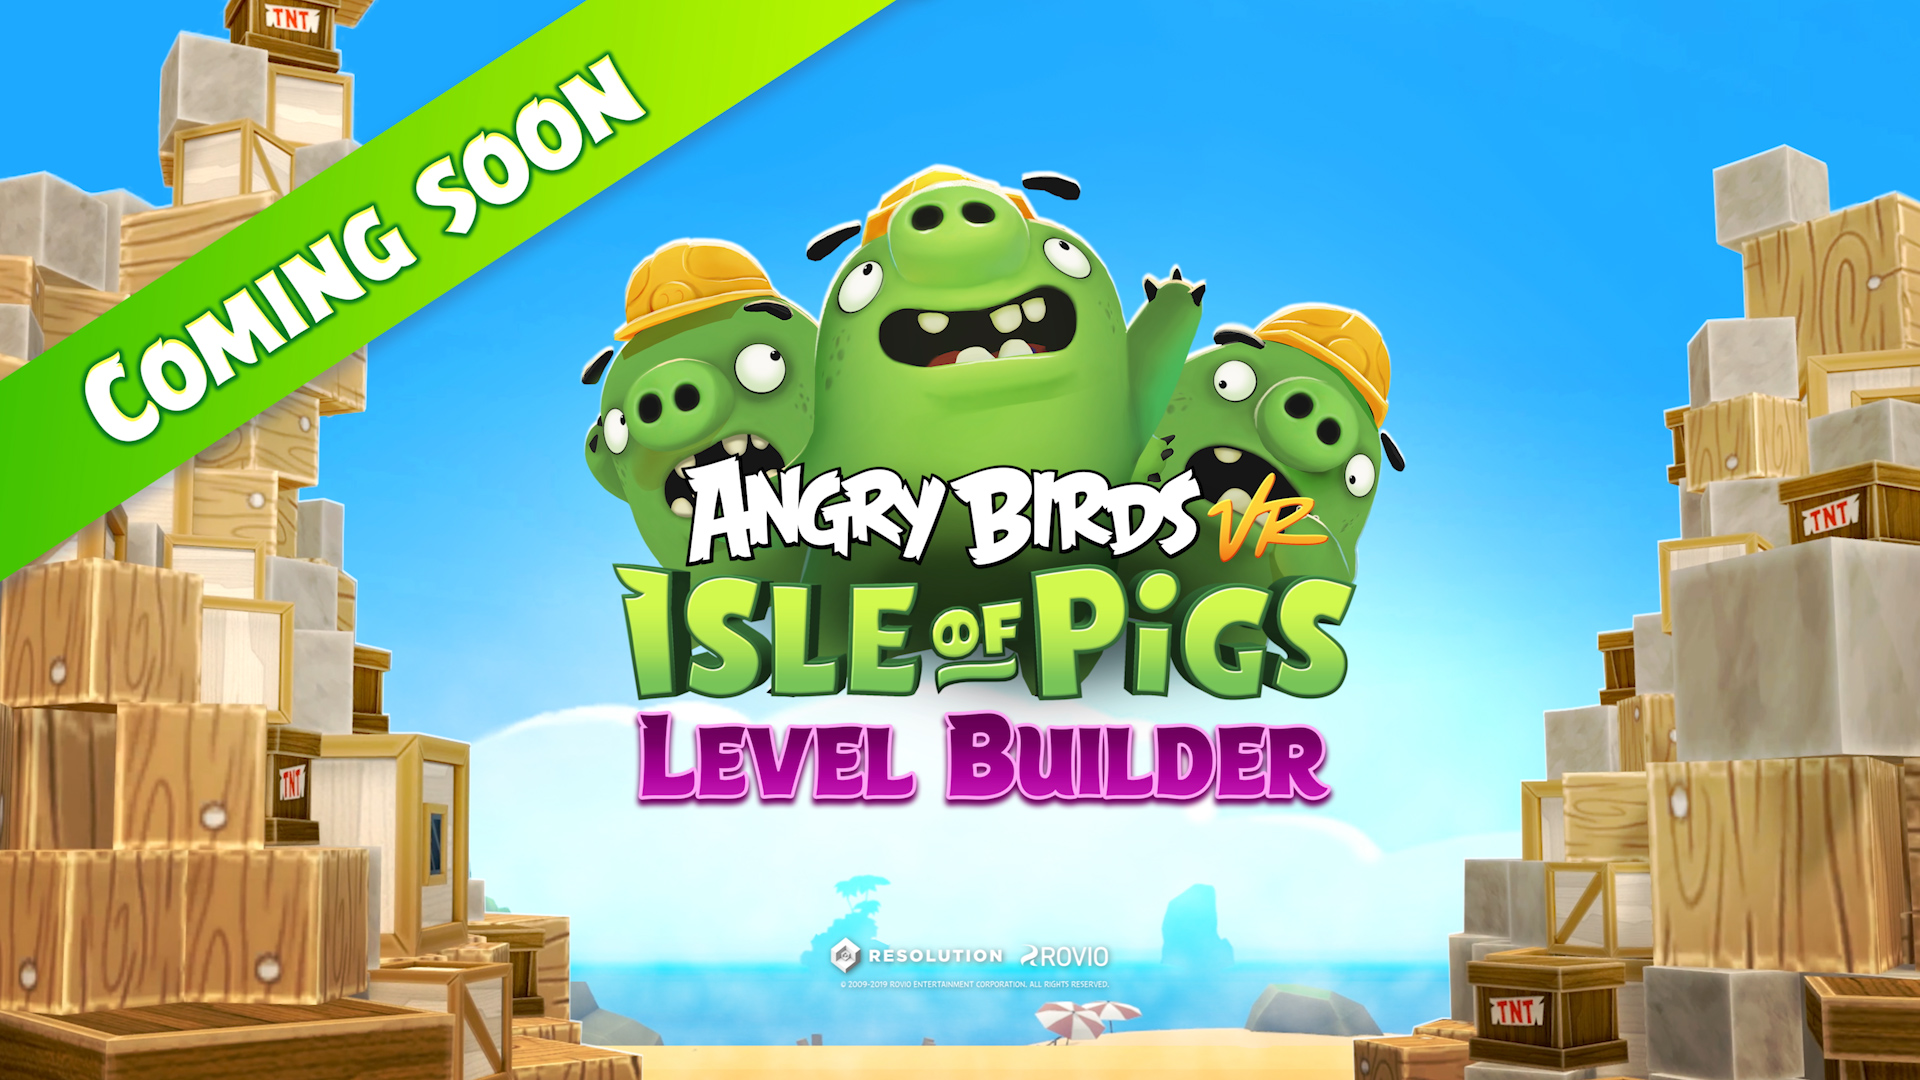 angry-birds-vr-isle-of-pigs-to-receive-level-builder-later-this-year-swiss-society-of-virtual